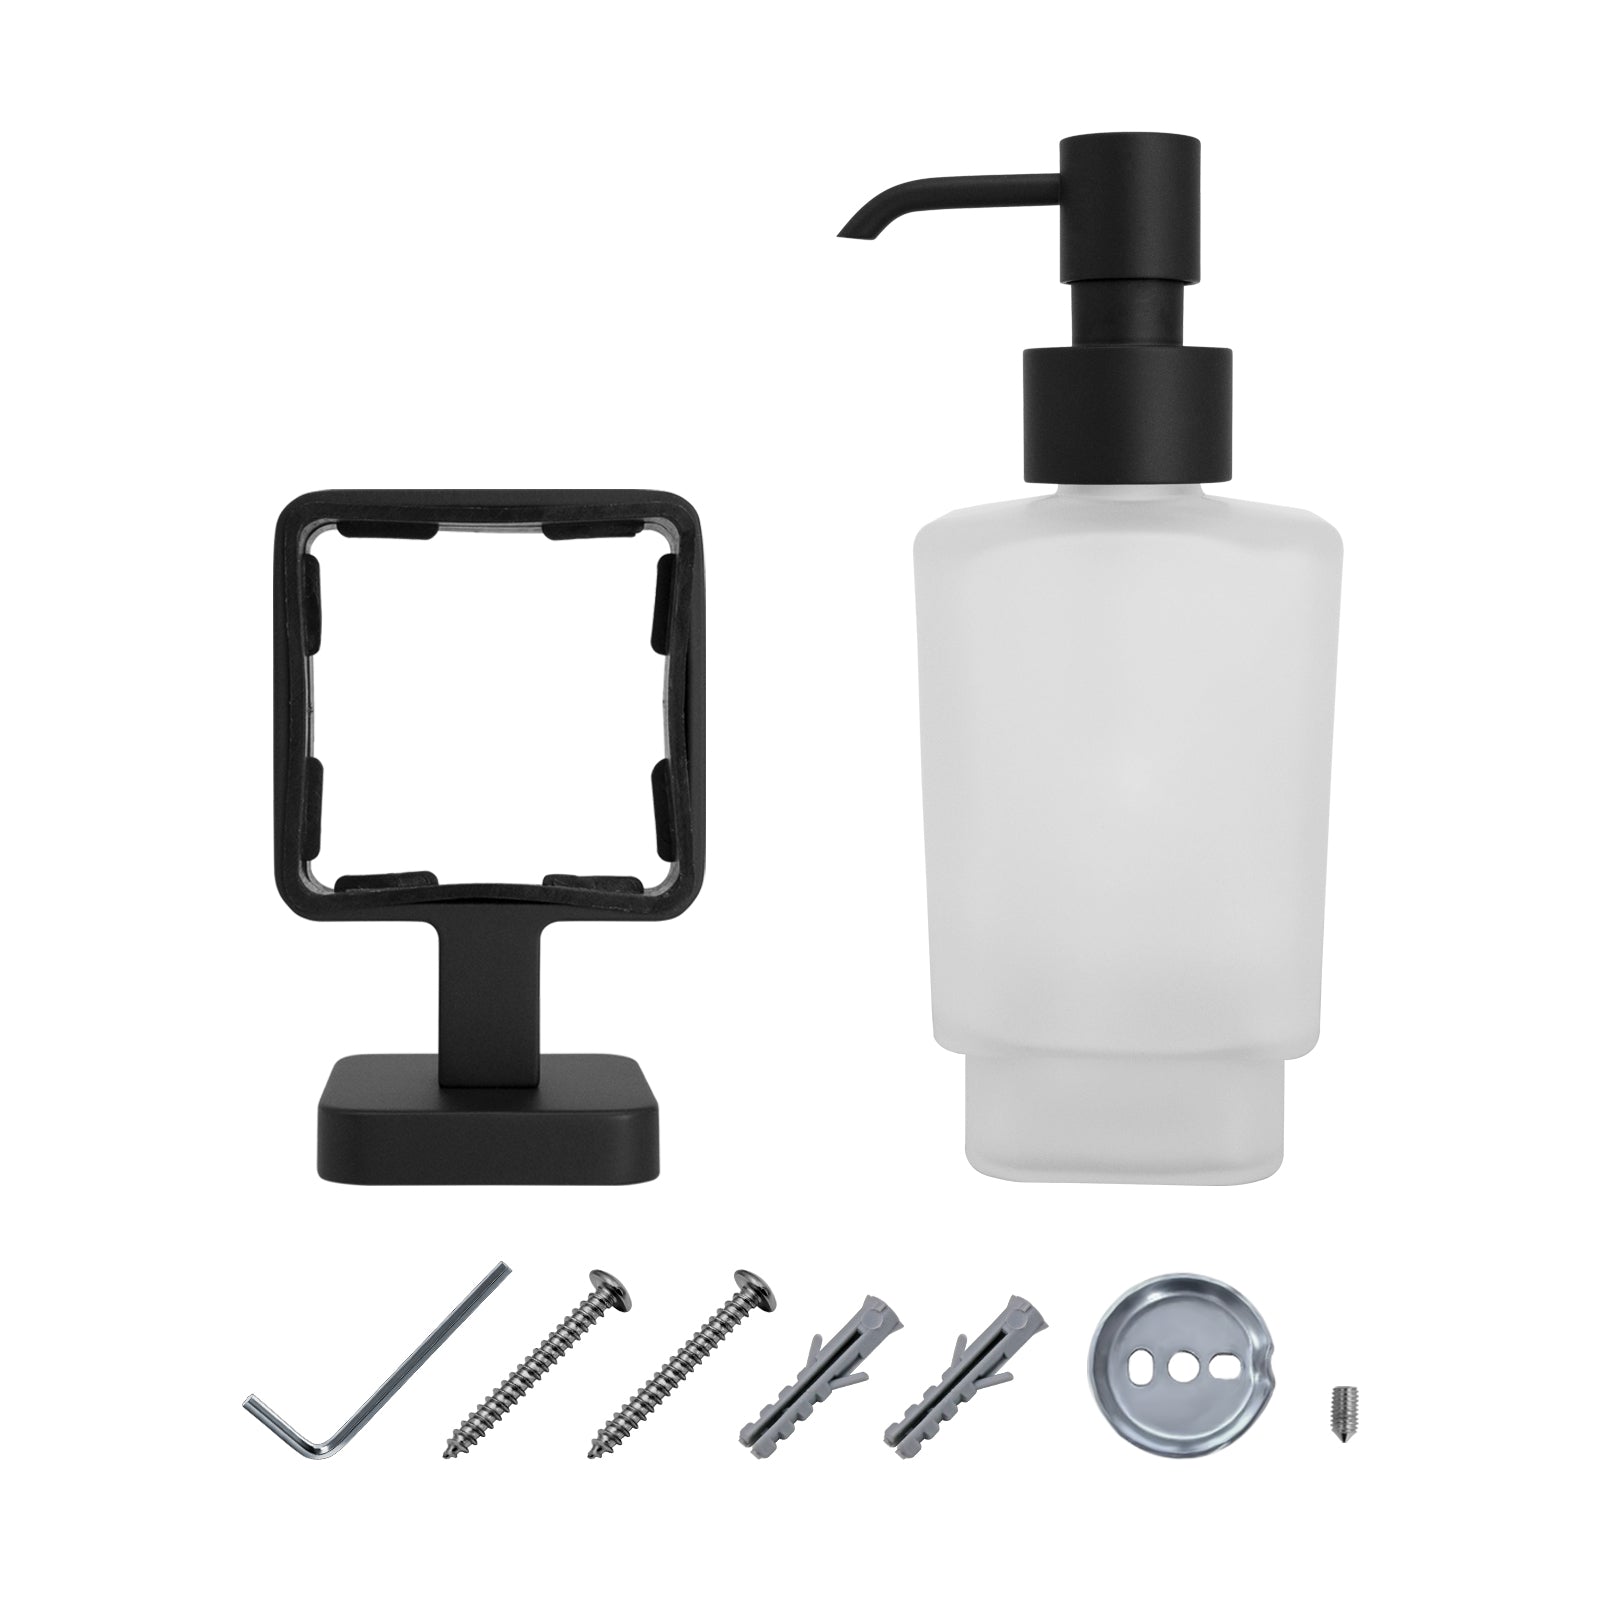 JassferryJASSFERRY Black Wall Mounted Soap Dispenser and Square Holder Frosted Glass Lotion Dispenser SetSoap Dispenser